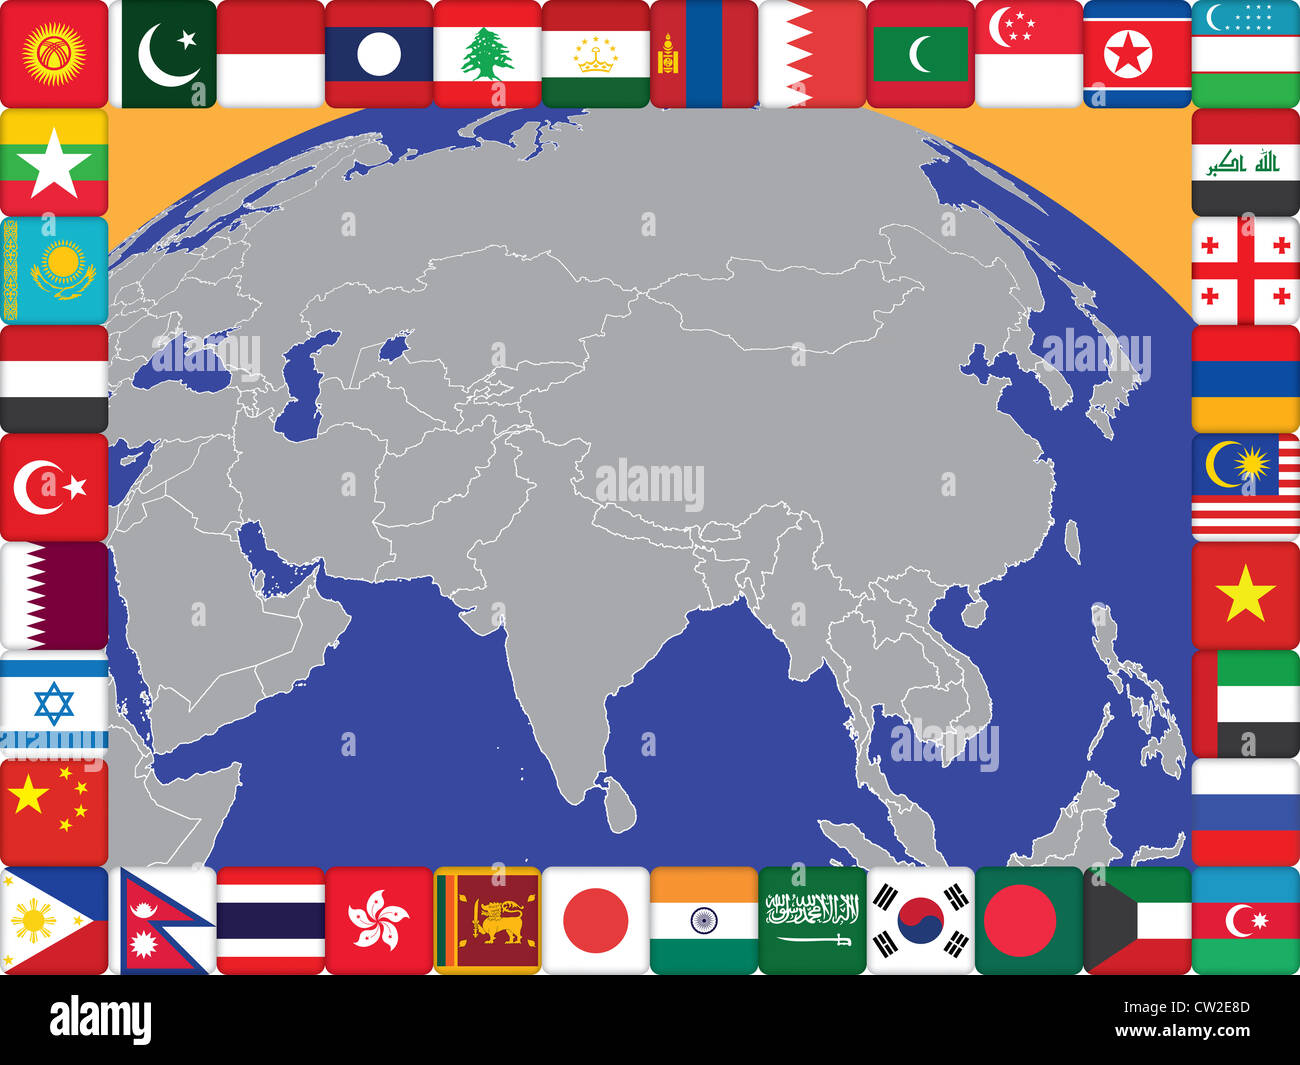 frame of Asian countries flags around the globe illustration Stock Photo